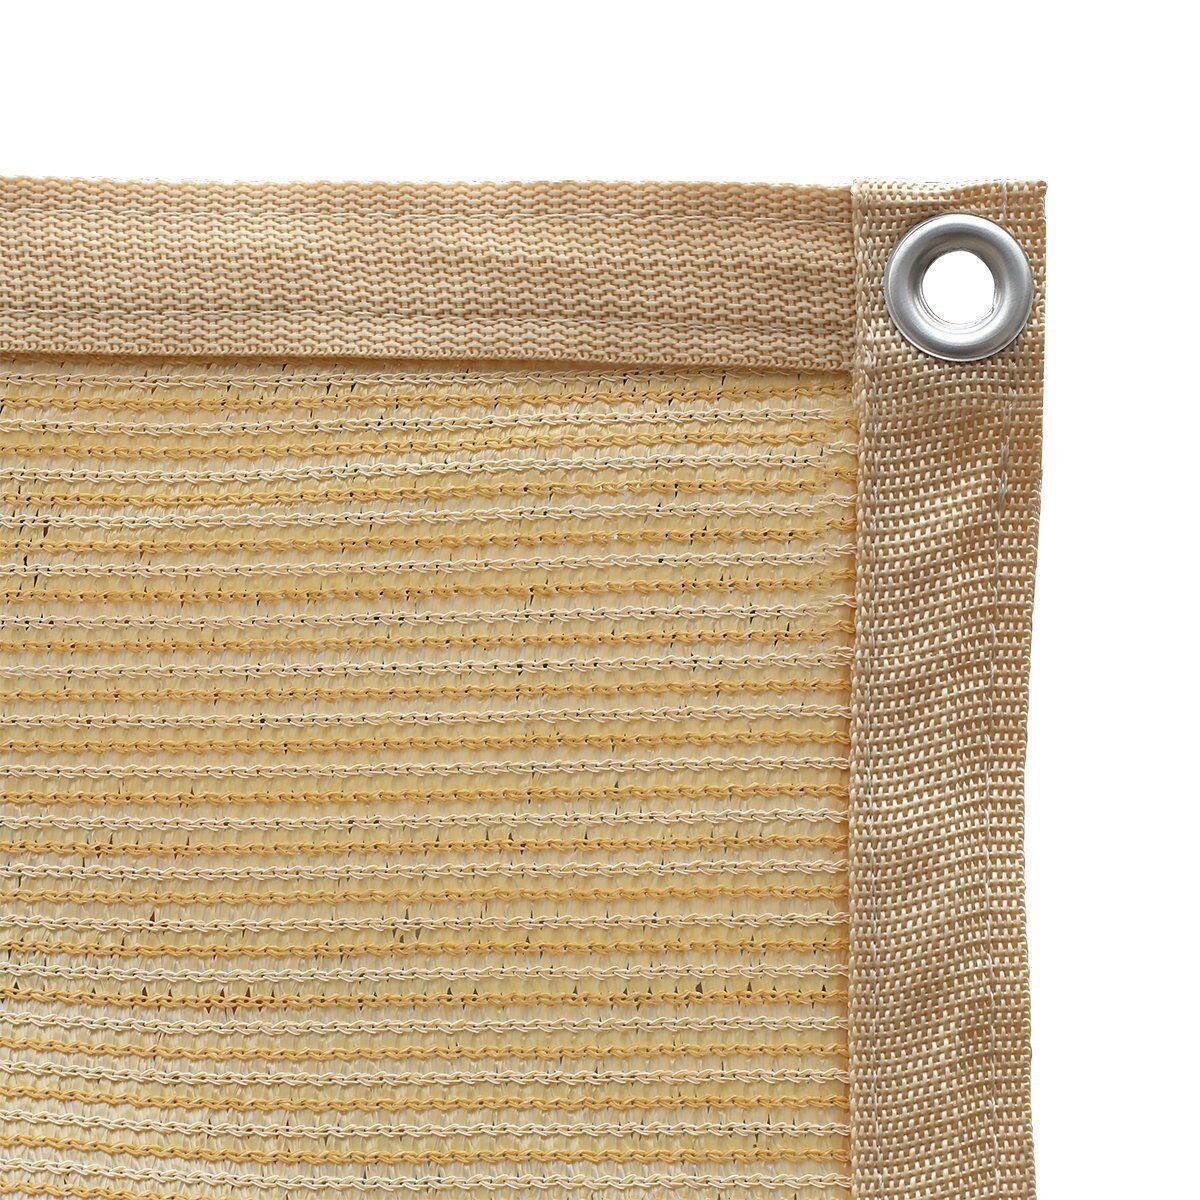 90% Wheat Sunblock Shade Cloth Taped Edge with Grommets UV Resistant Shade Net